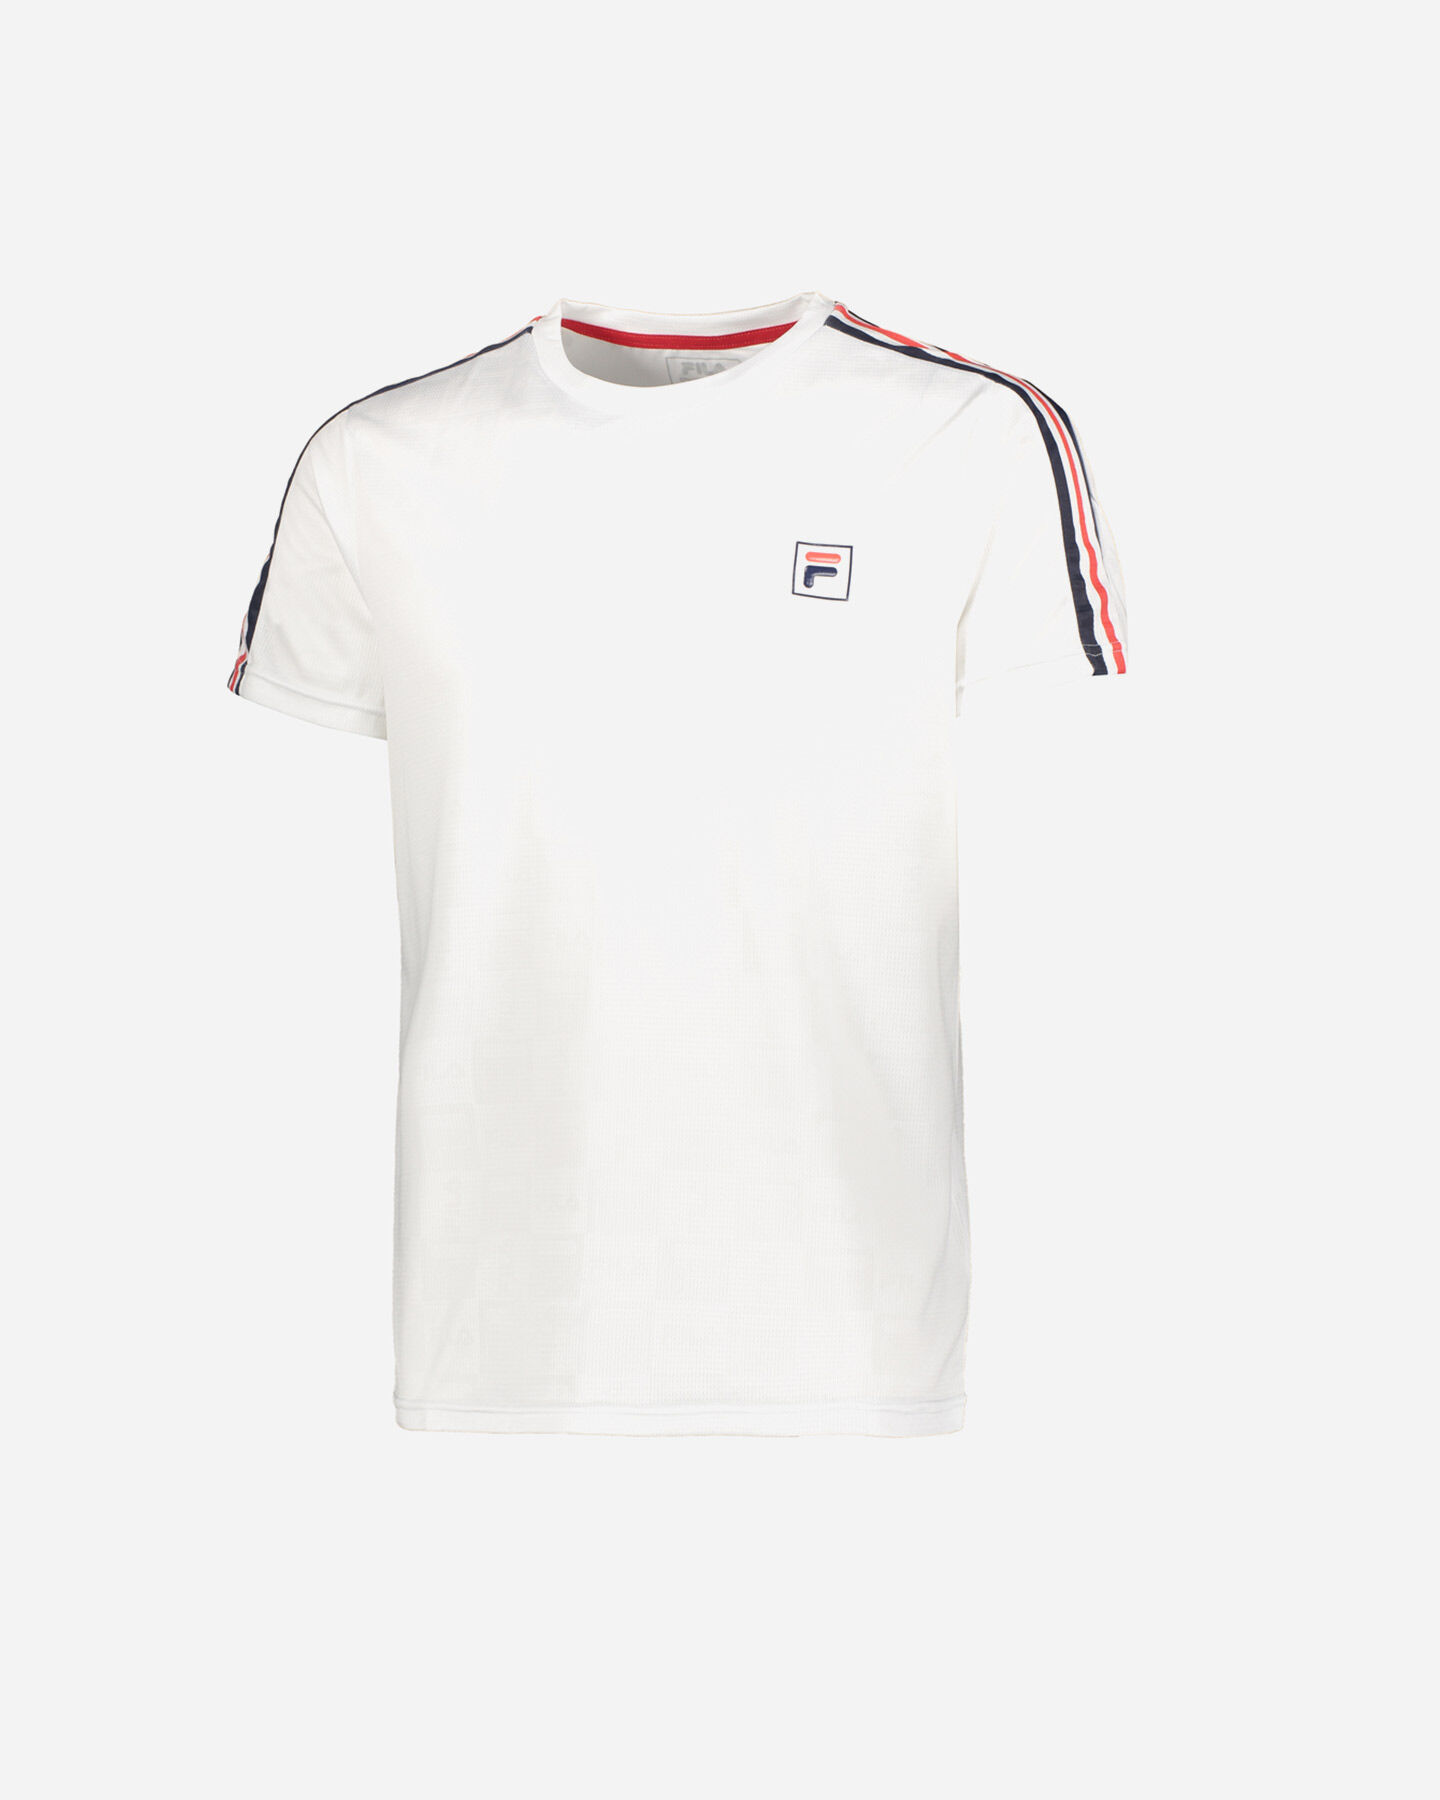  T-Shirt tennis FILA TENNIS ALL OVER M S4088227|001|S scatto 0